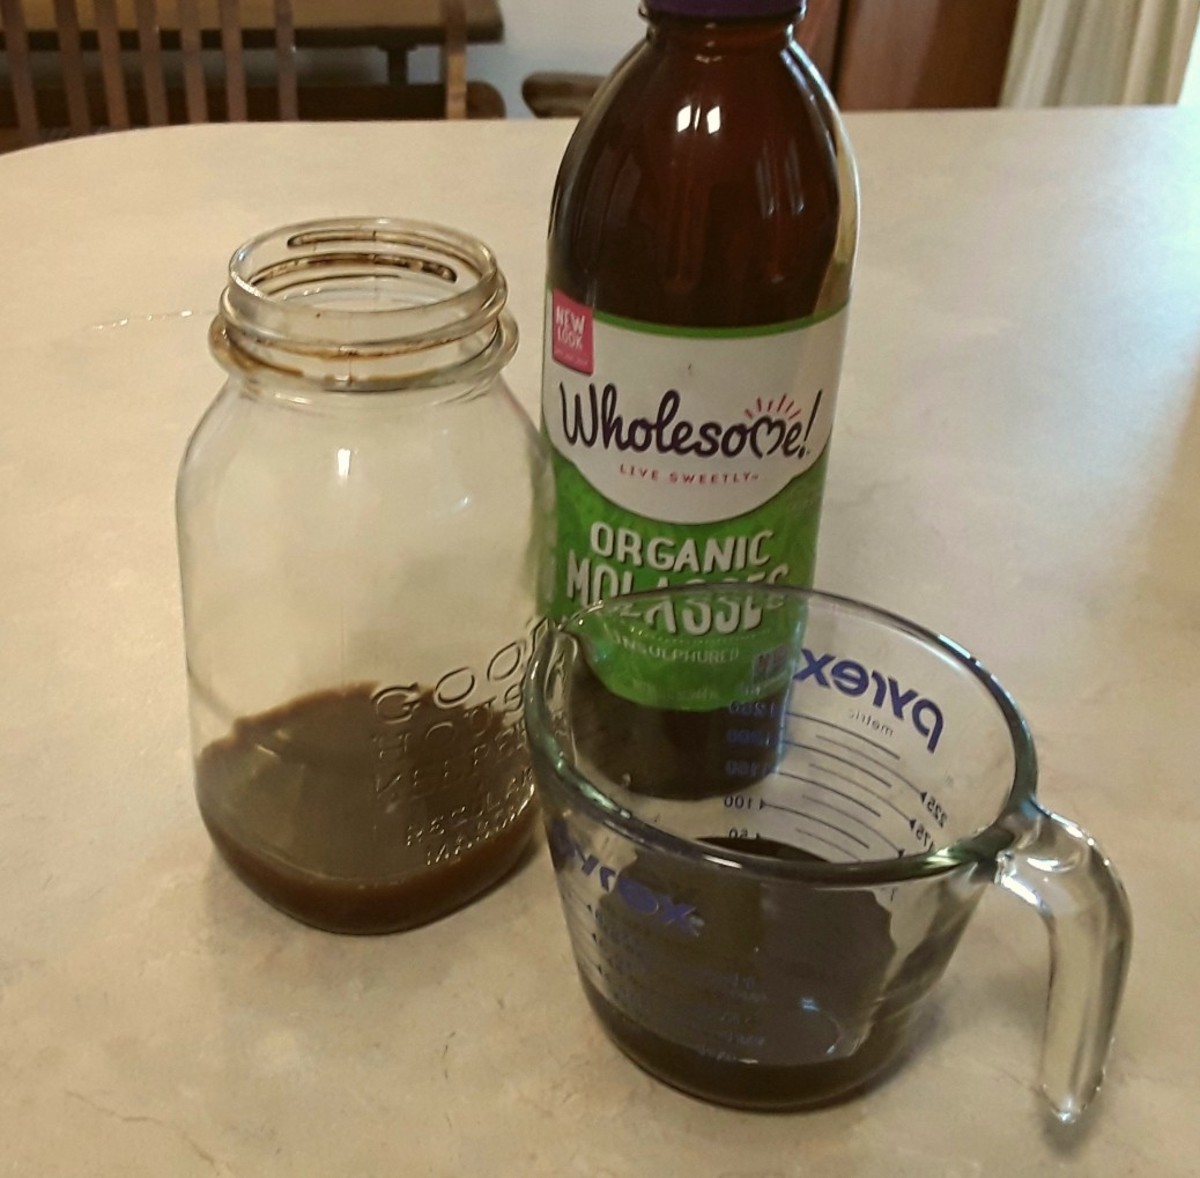 Wholesome Sweeteners makes a wonderful and nutritious molasses.  I measured only to verify the recipe for the sake of accuracy, but once you get the hang of it, you will be able to add a good-sized dollop instead.